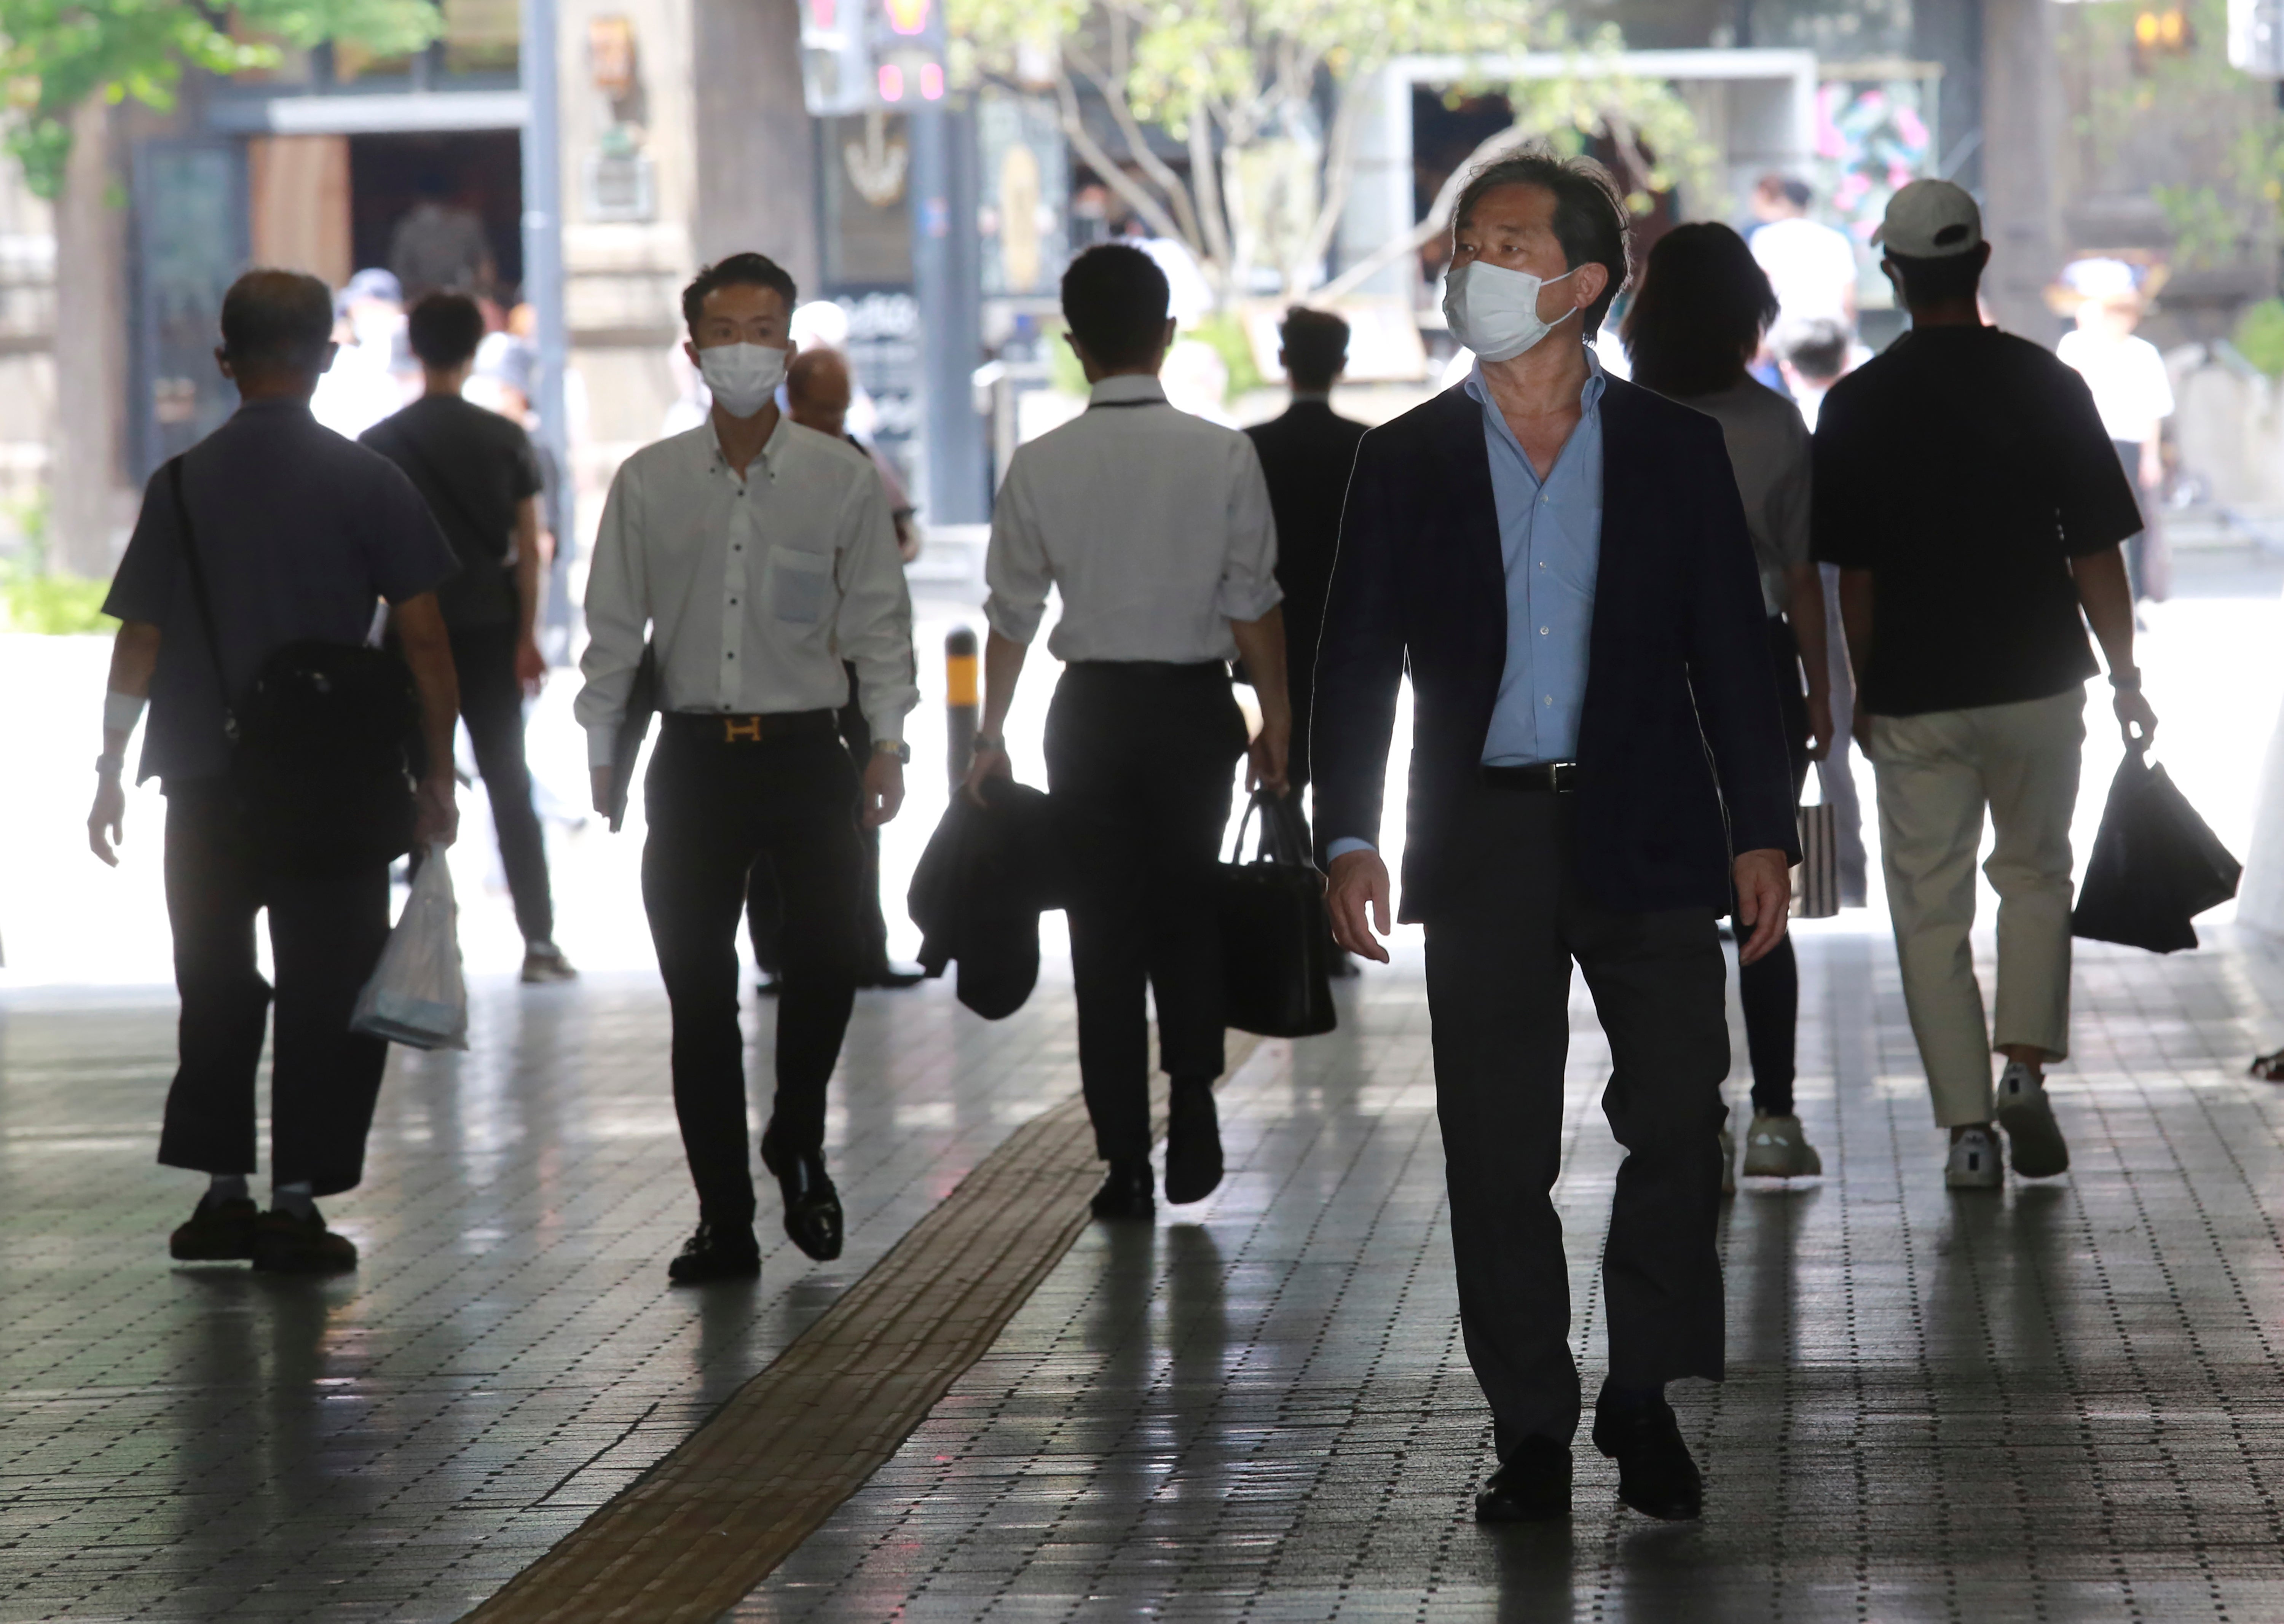 ‘In the UK, like Japan, we’ve become accustomed to keeping masks in our pockets and wearing them when we come into close contact with other people’